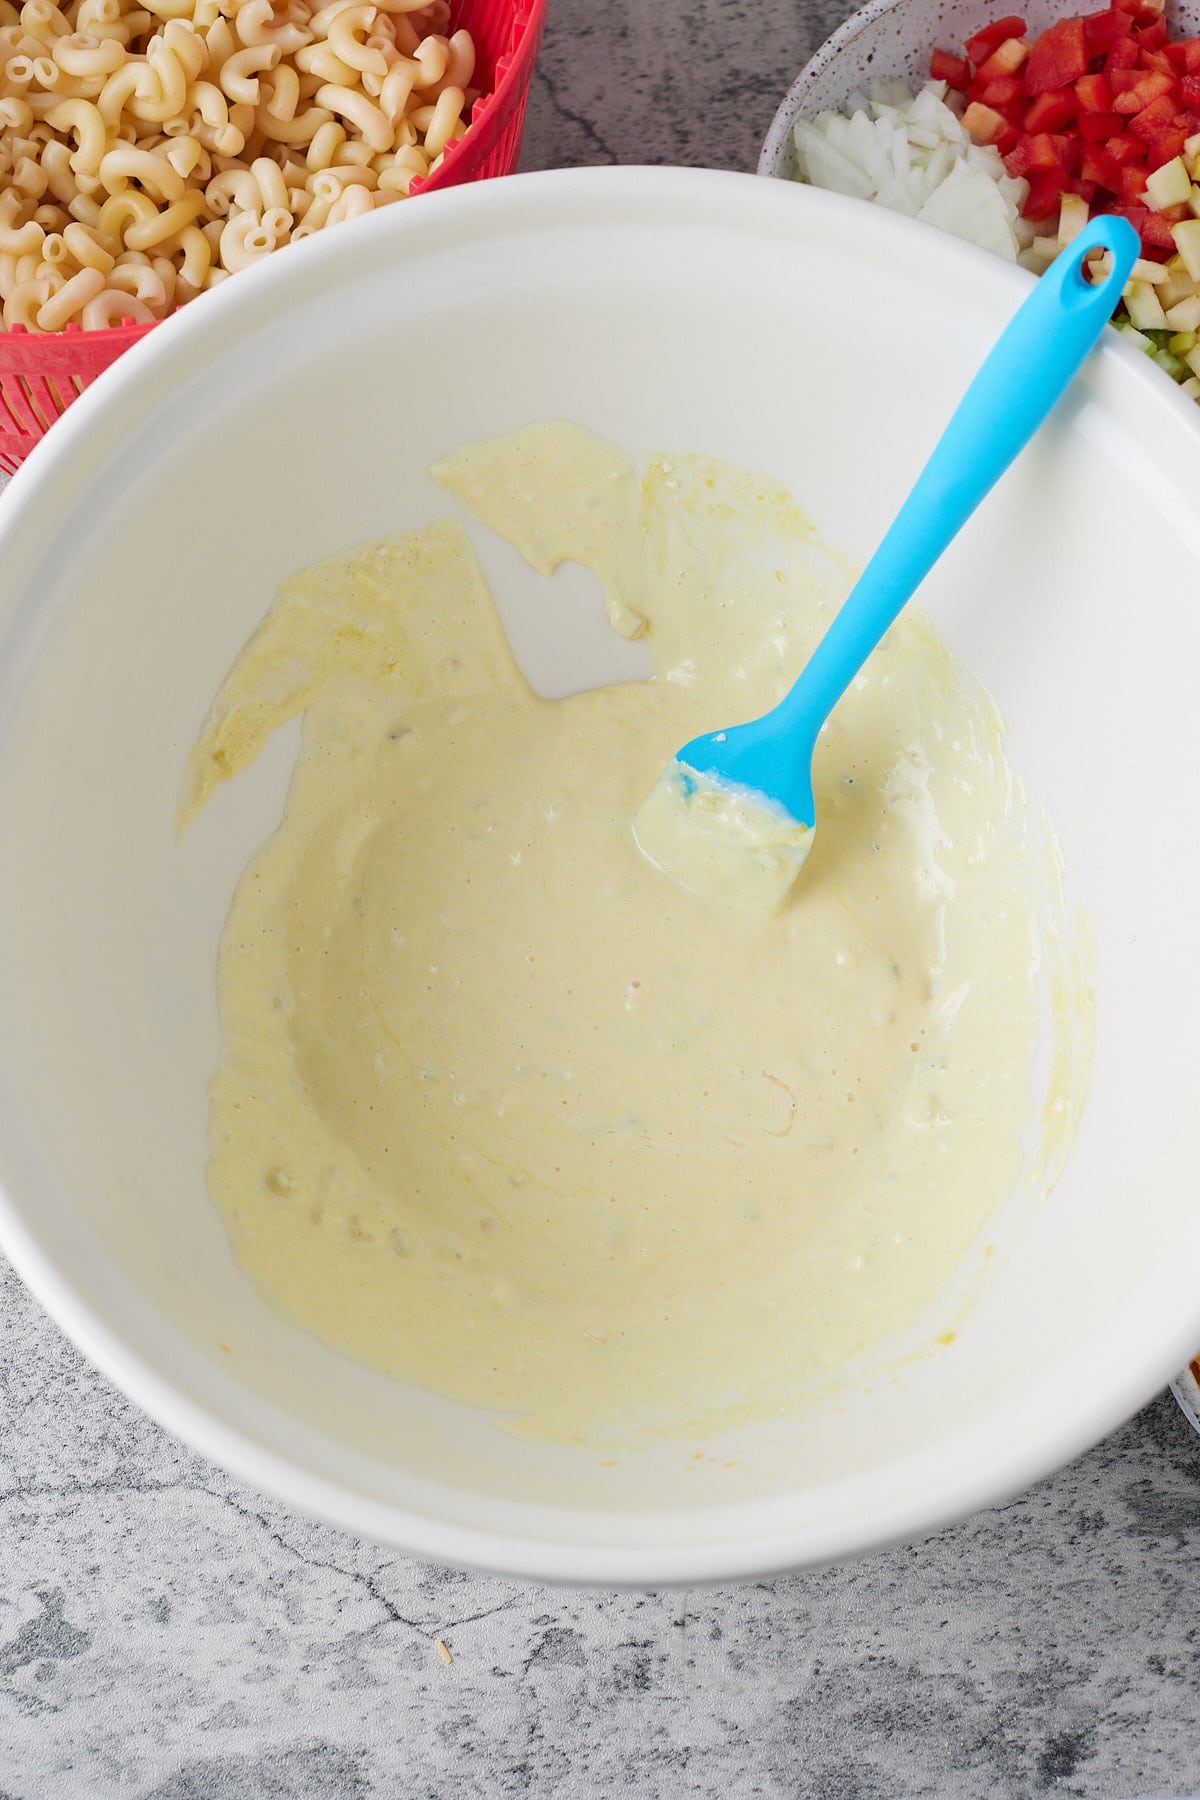 Stirring the salad dressing together in a bowl.